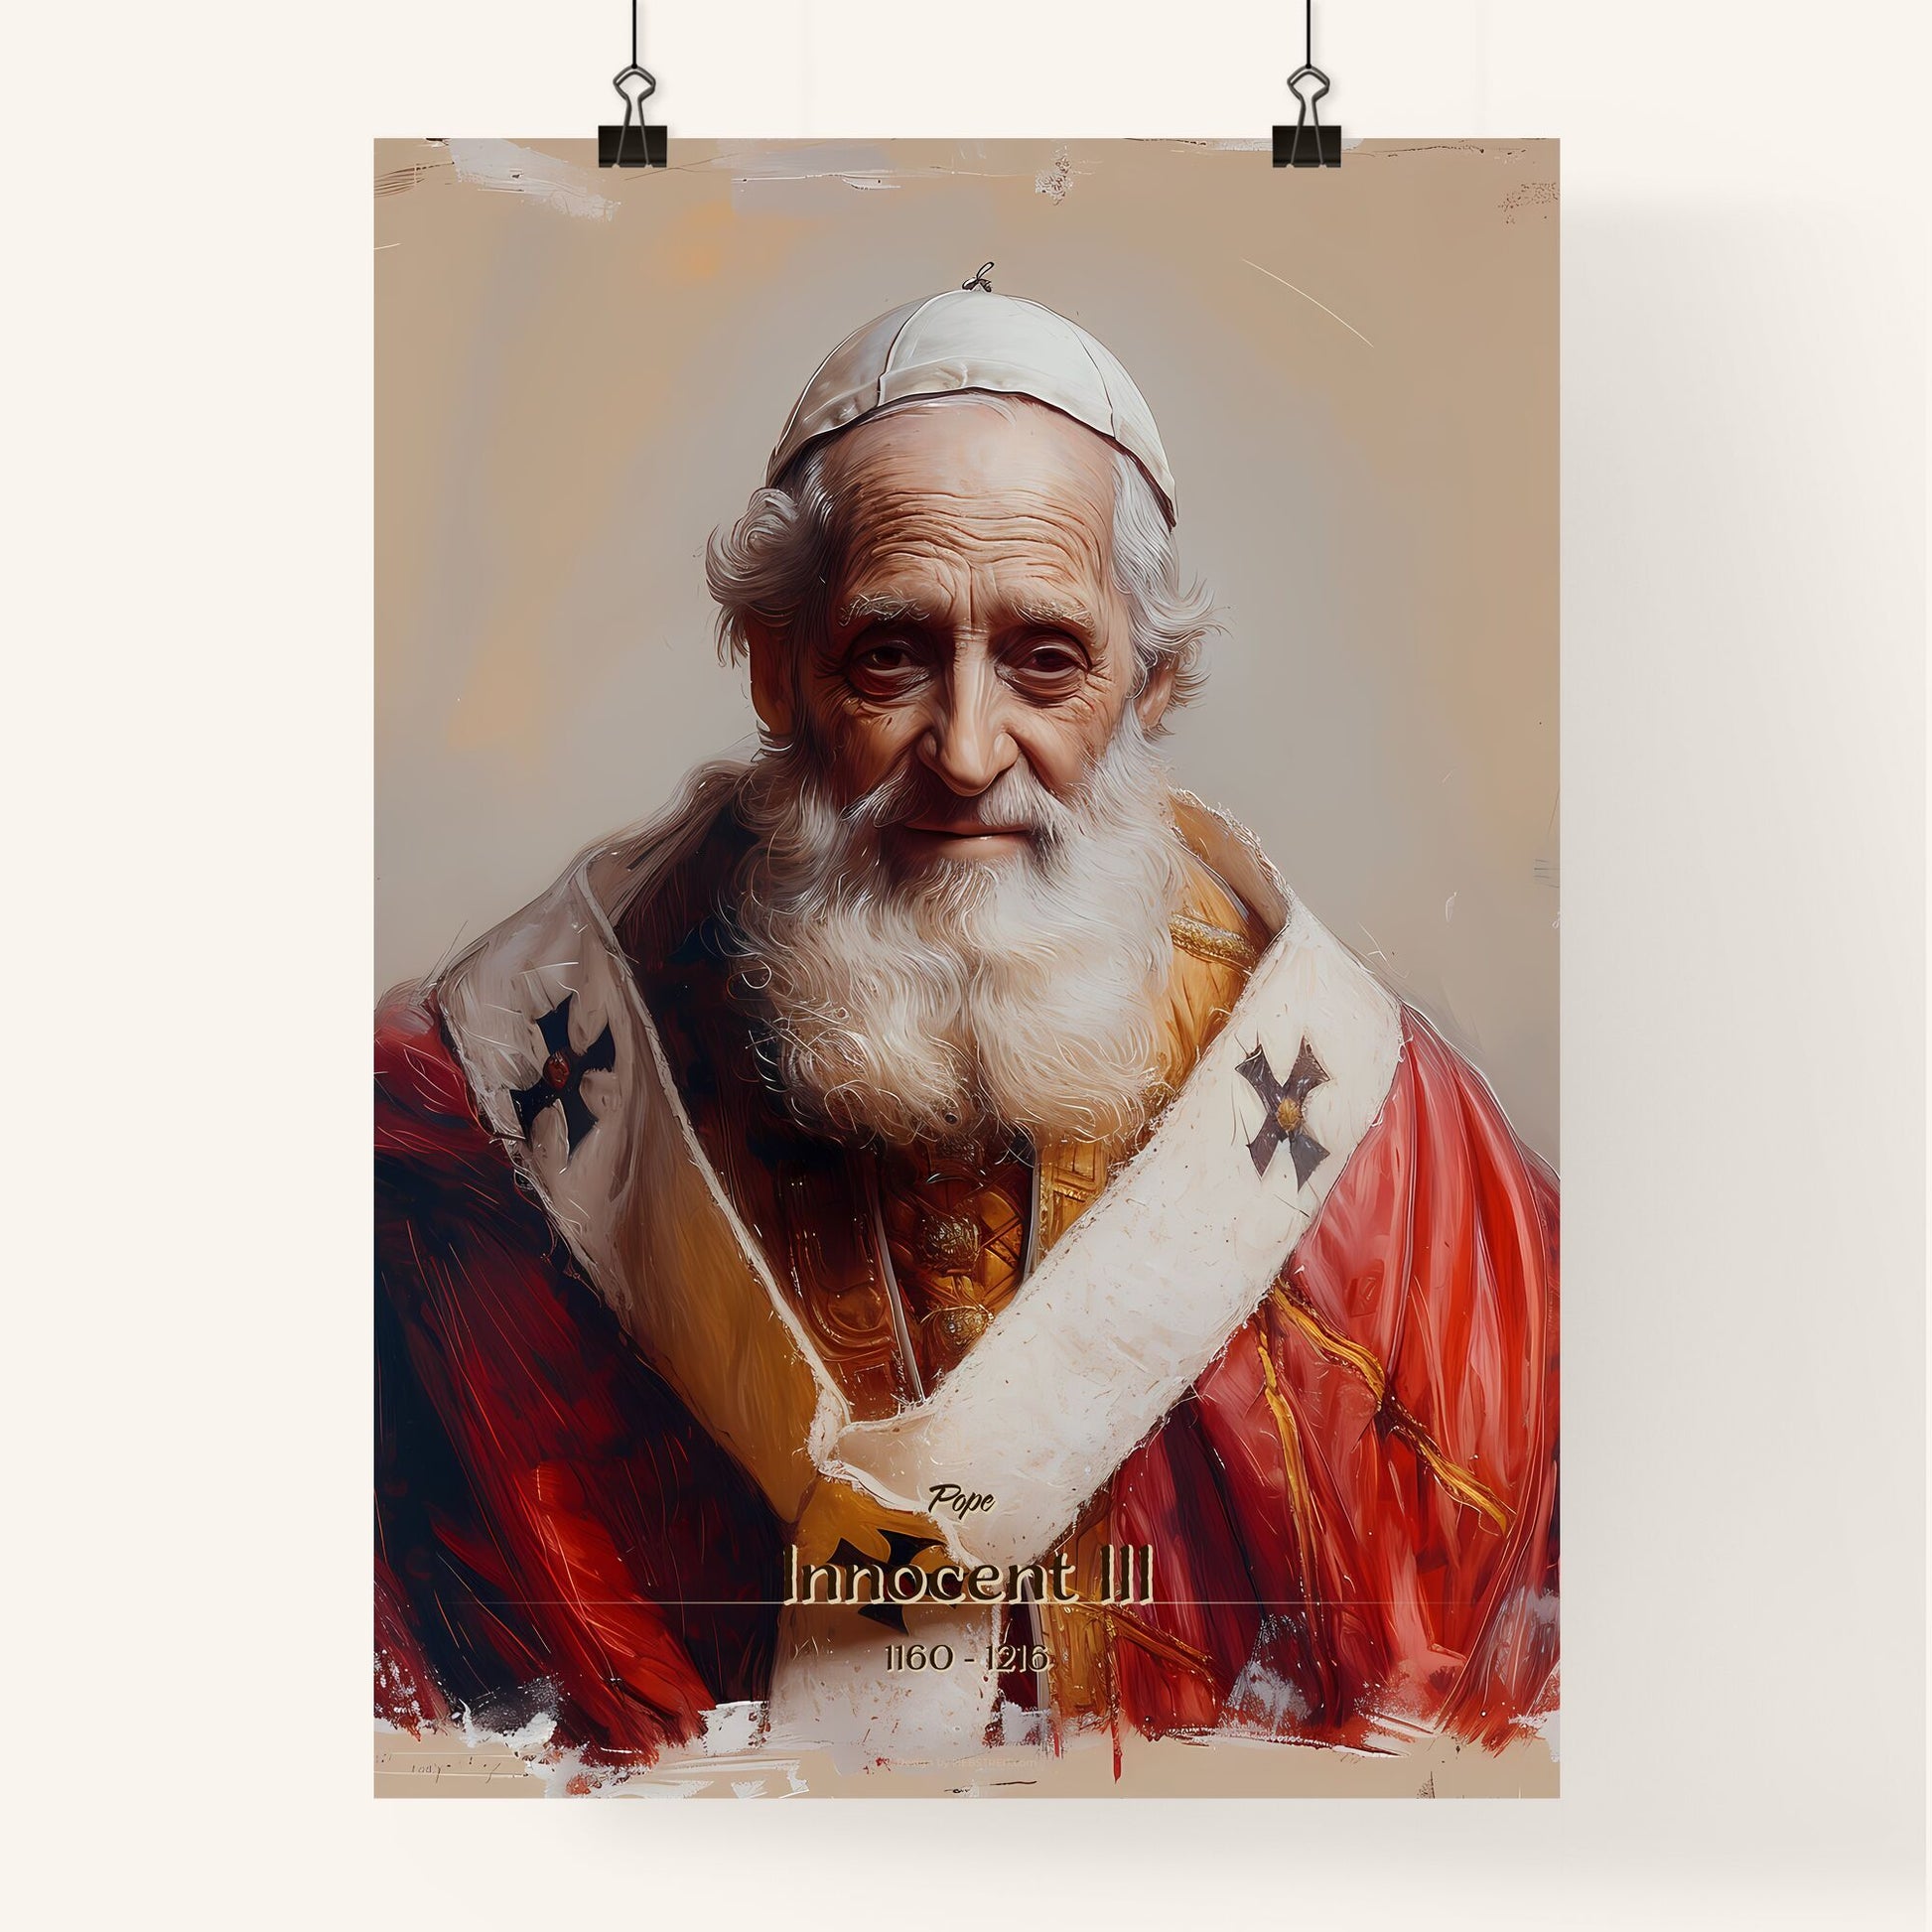 Pope, Innocent III, 1160 - 1216, A Poster of a man in a red robe Default Title